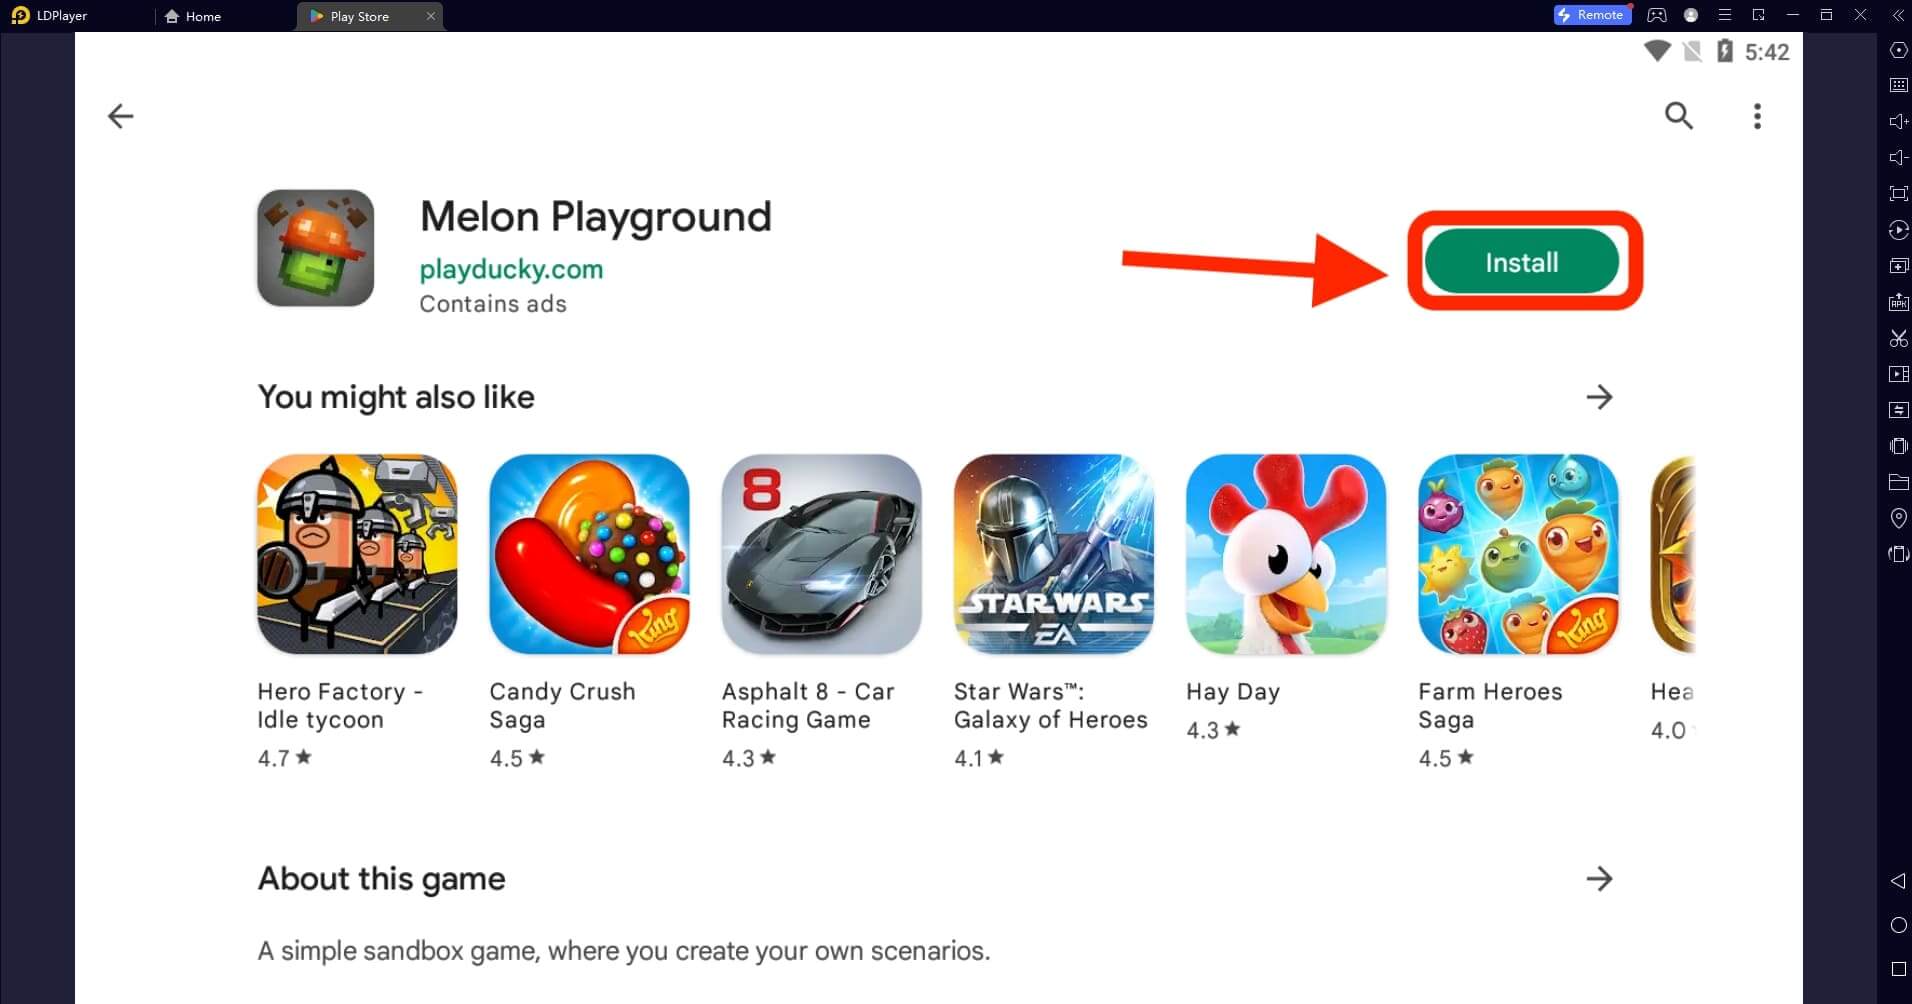 Download Melon Playground APK for Android, Play on PC and Mac